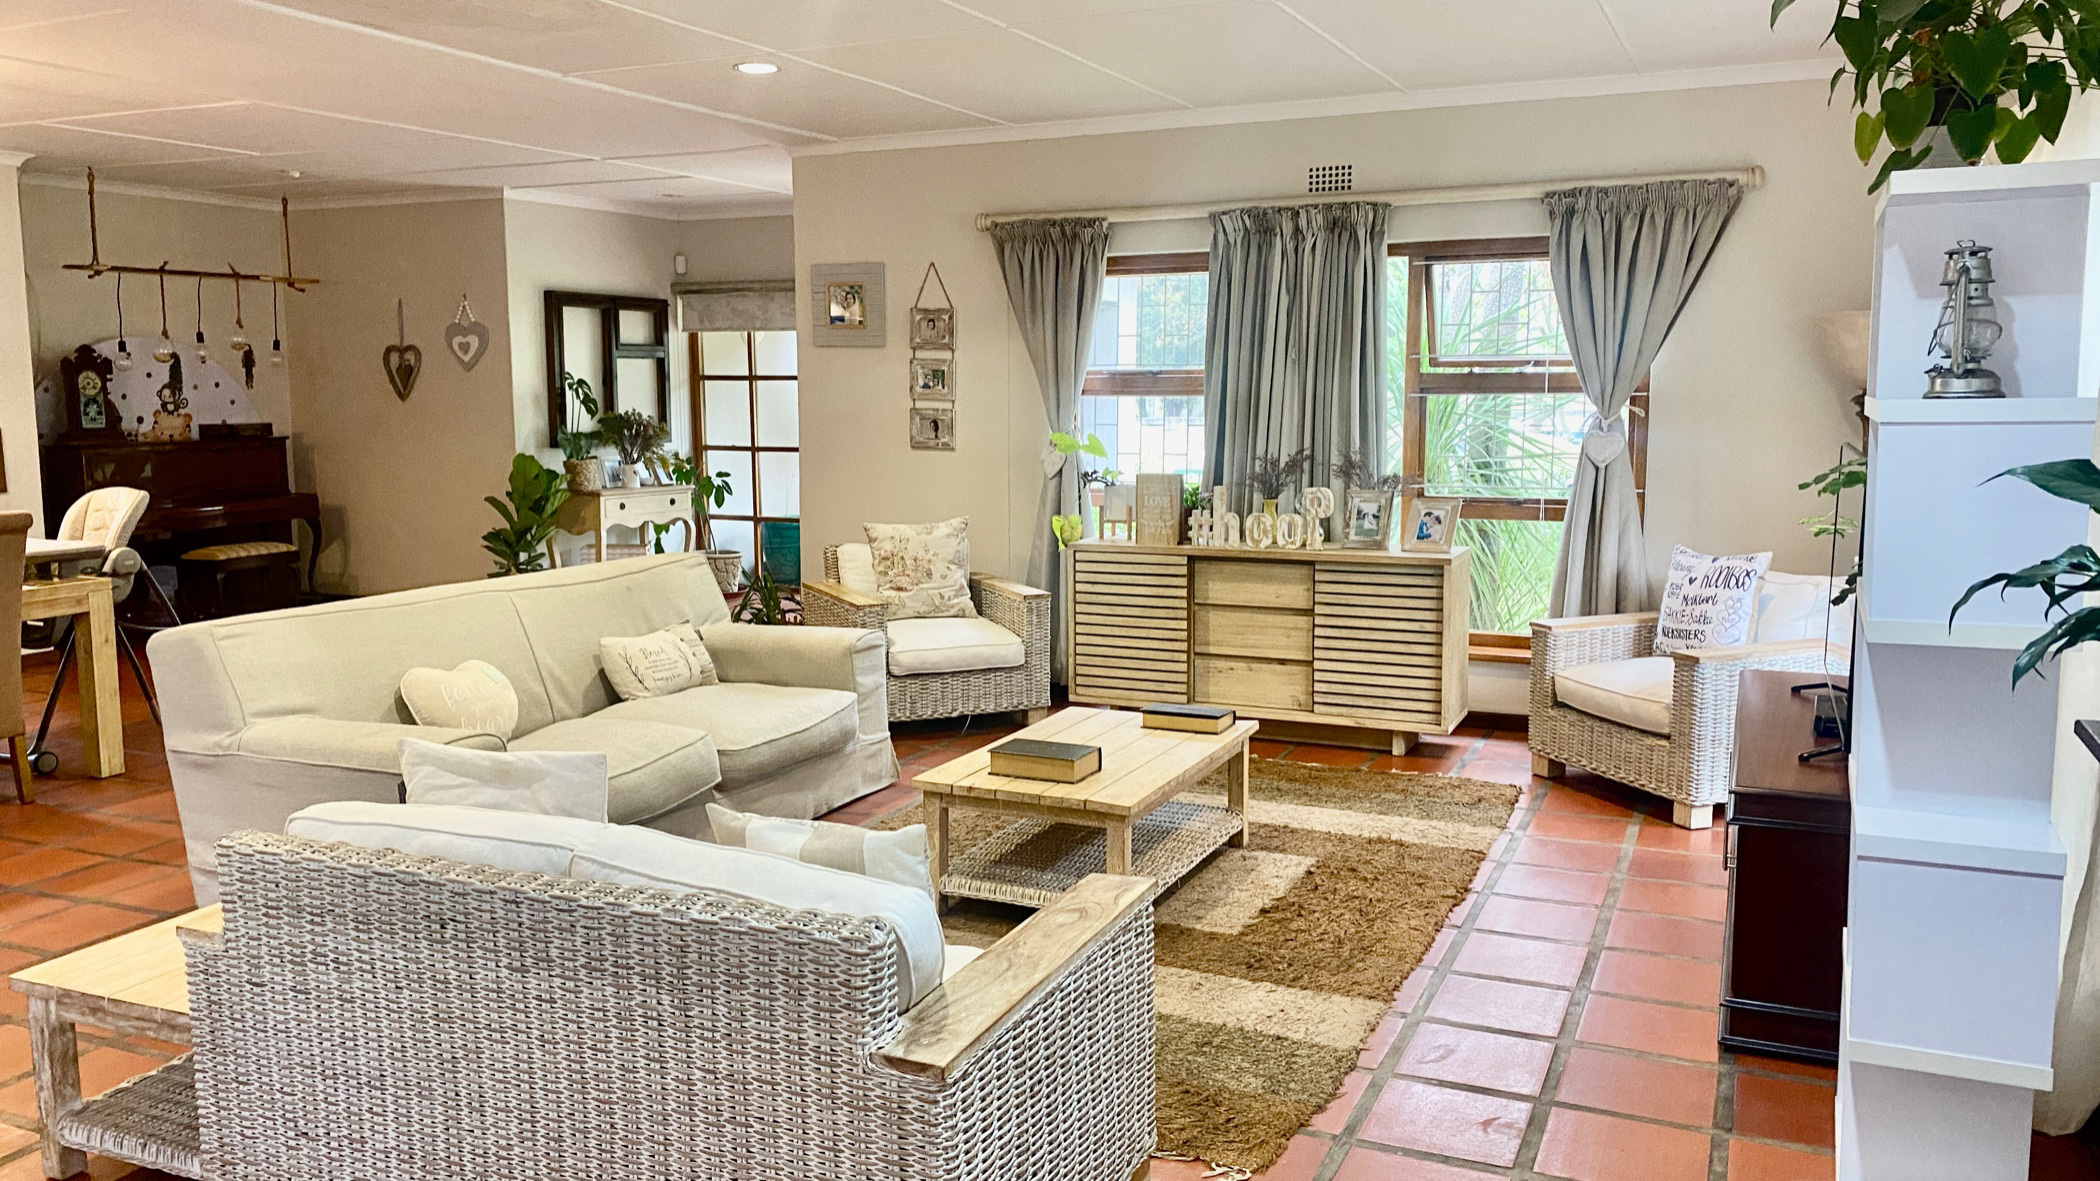 4 bedroom house for sale in Swellendam